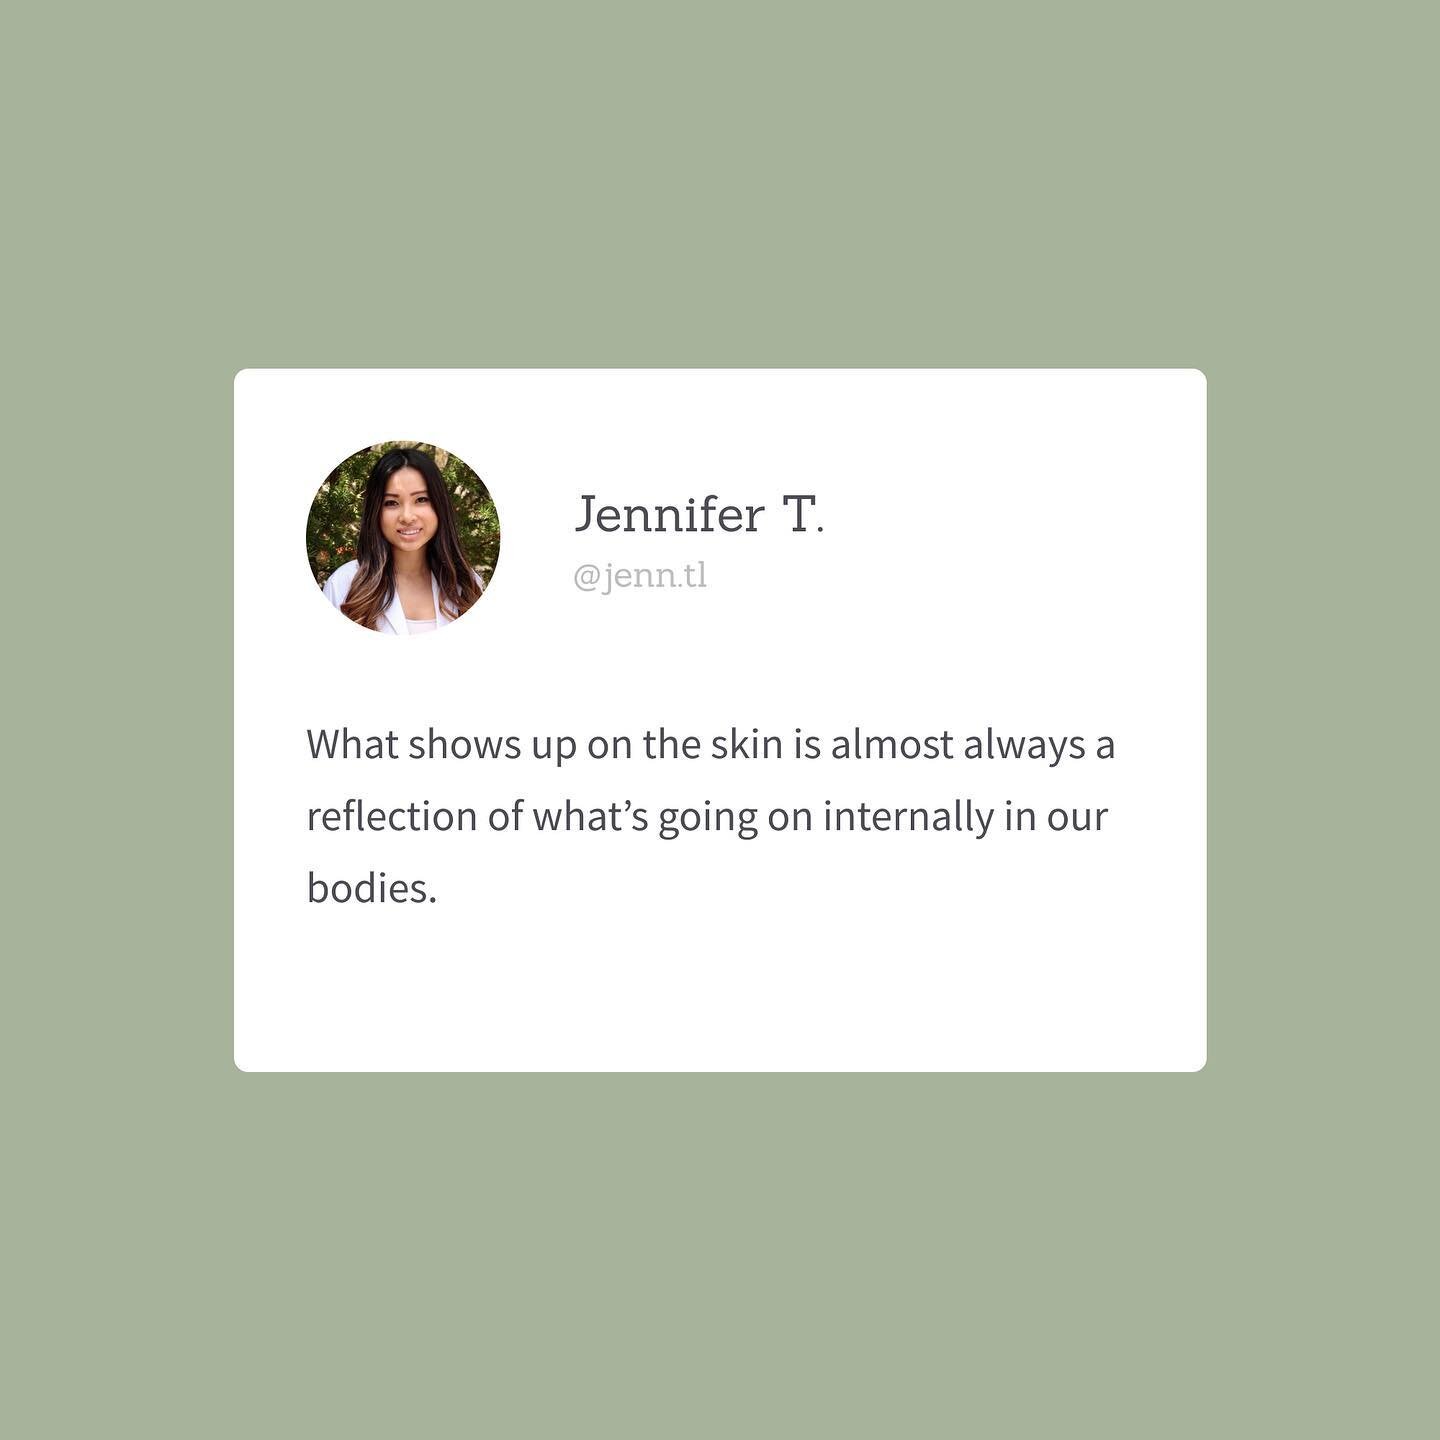 Treating the skin with a whole-body approach means that what&rsquo;s going on inside your body is also being investigated. Whether it be acne, eczema, psoriasis, hives - getting to the root cause is a major key 🔑 
The skin is actually connected with